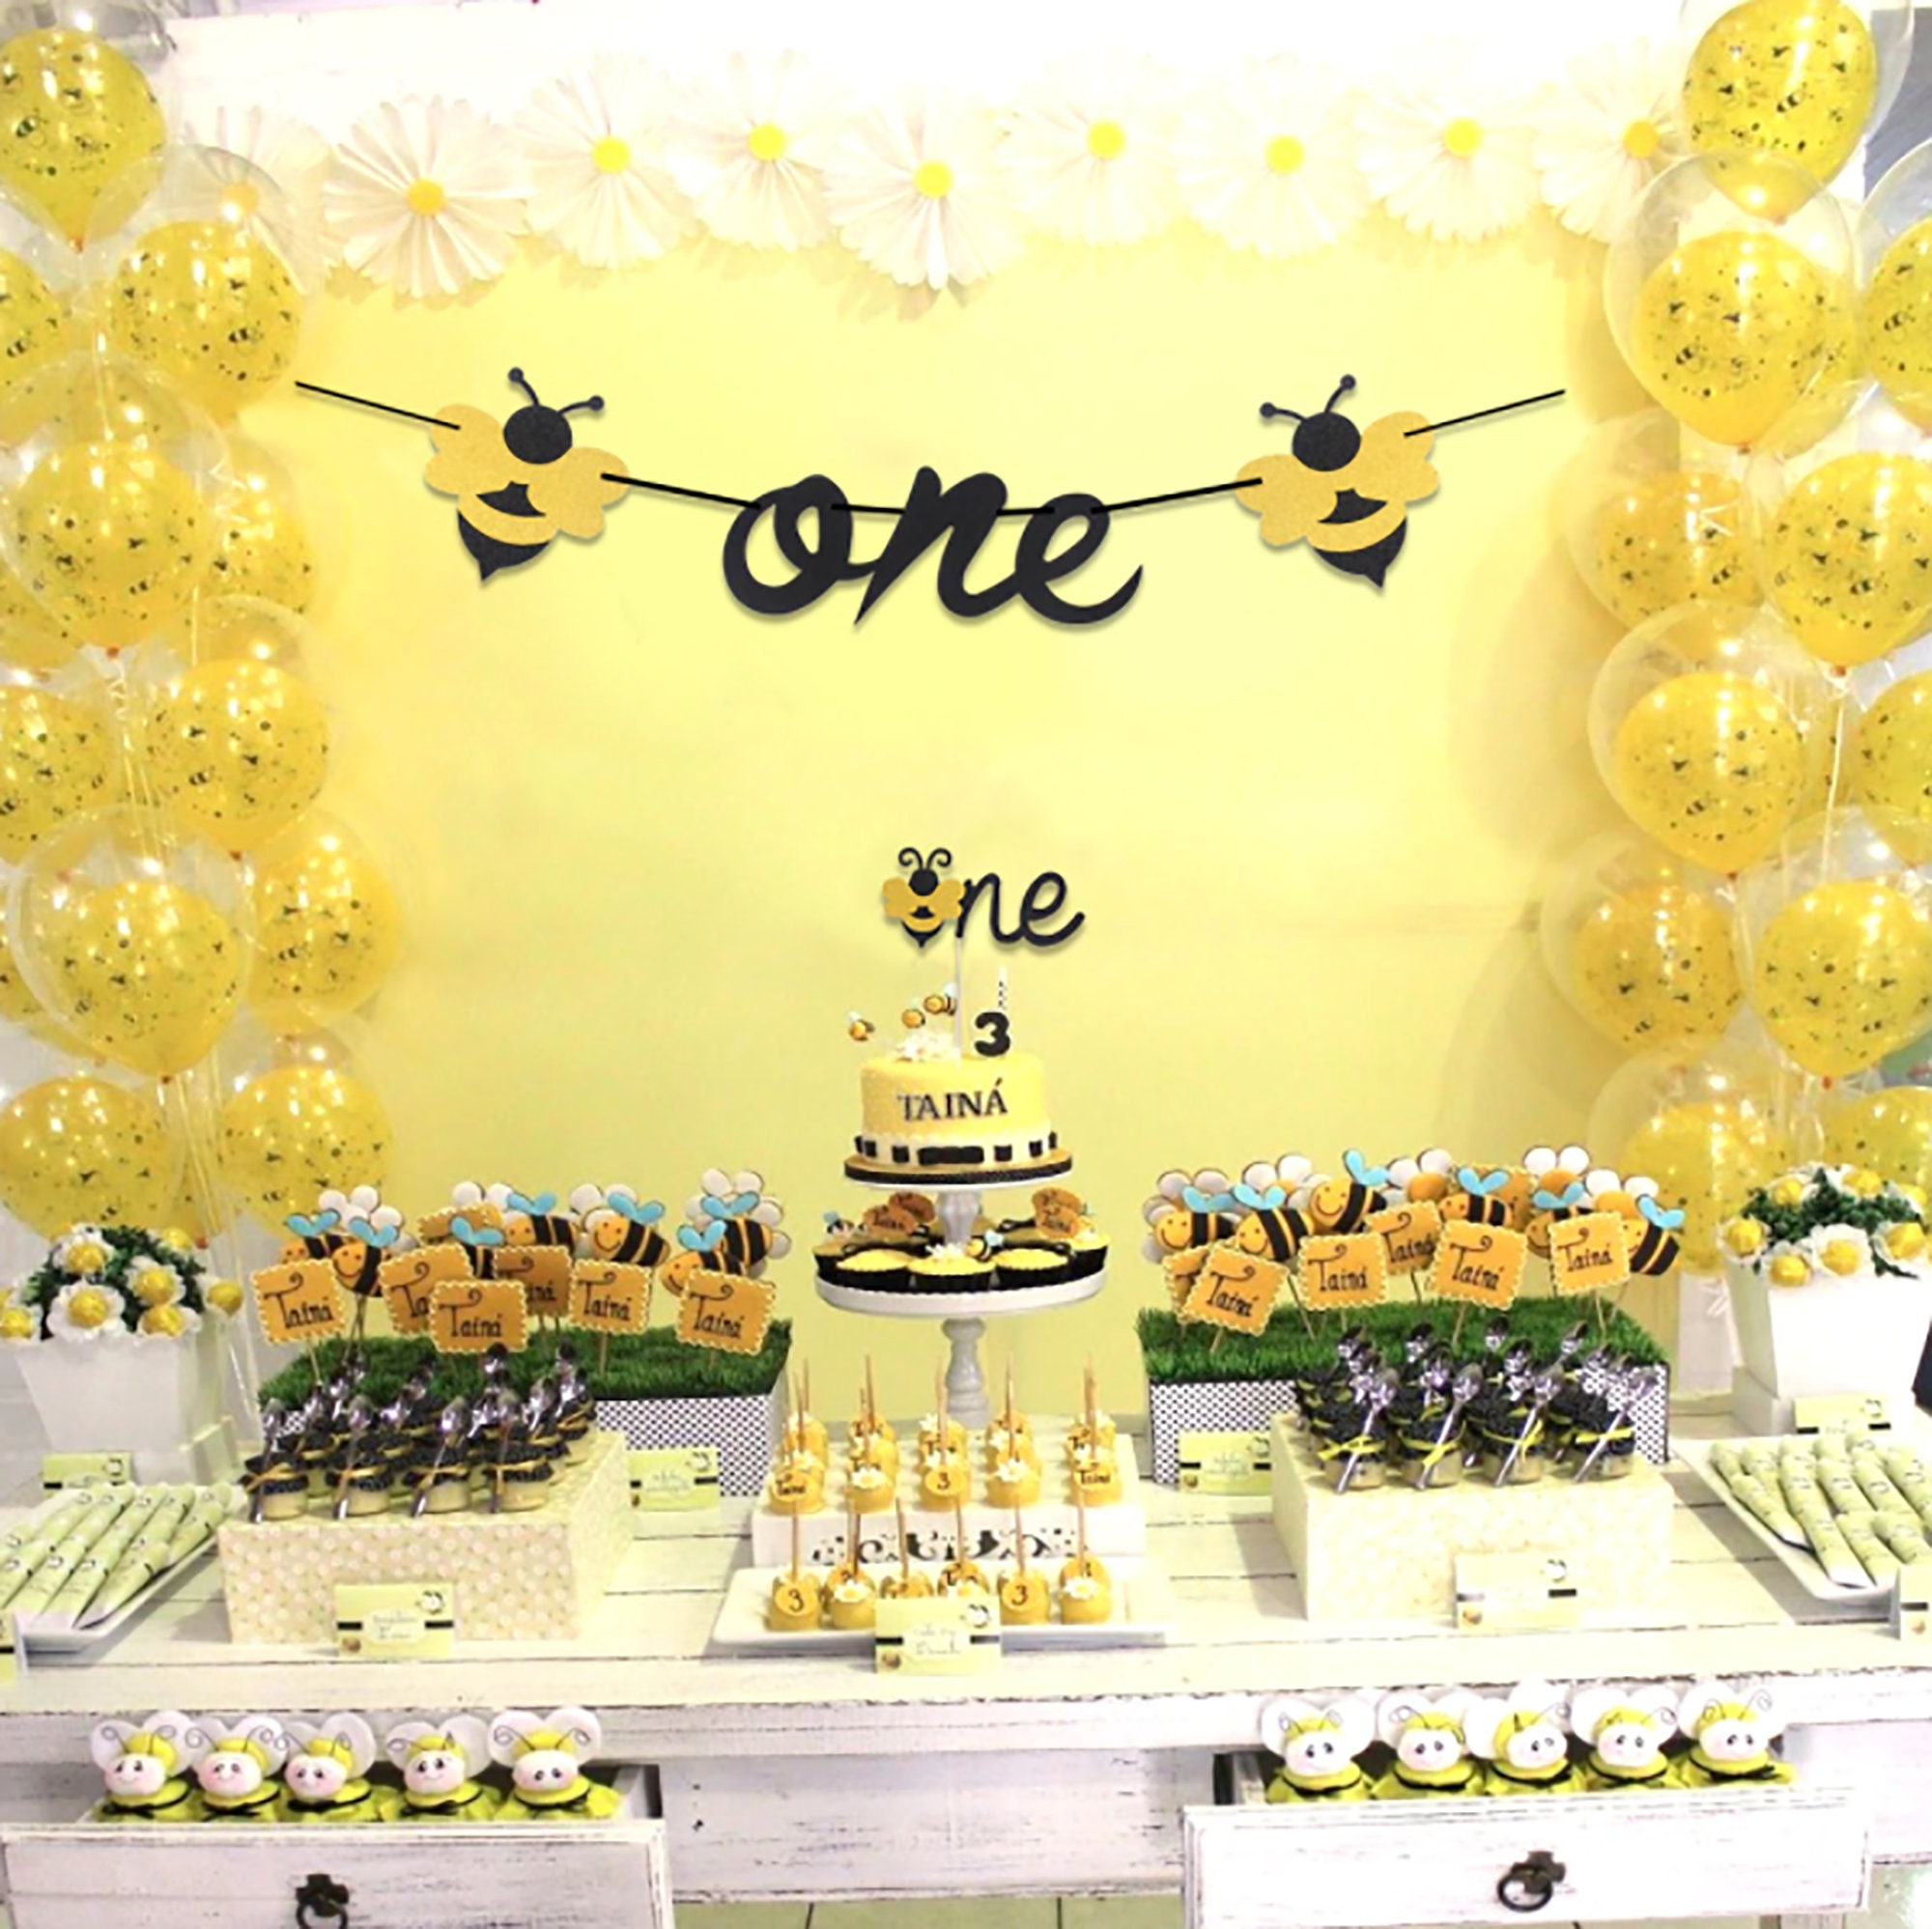 18 Pieces Bumble Bee Party Centerpieces for Honey Bee Baby Shower  Decorations Table Centerpieces with Sticks Bee Birthday Party Supplies Cake  Toppers